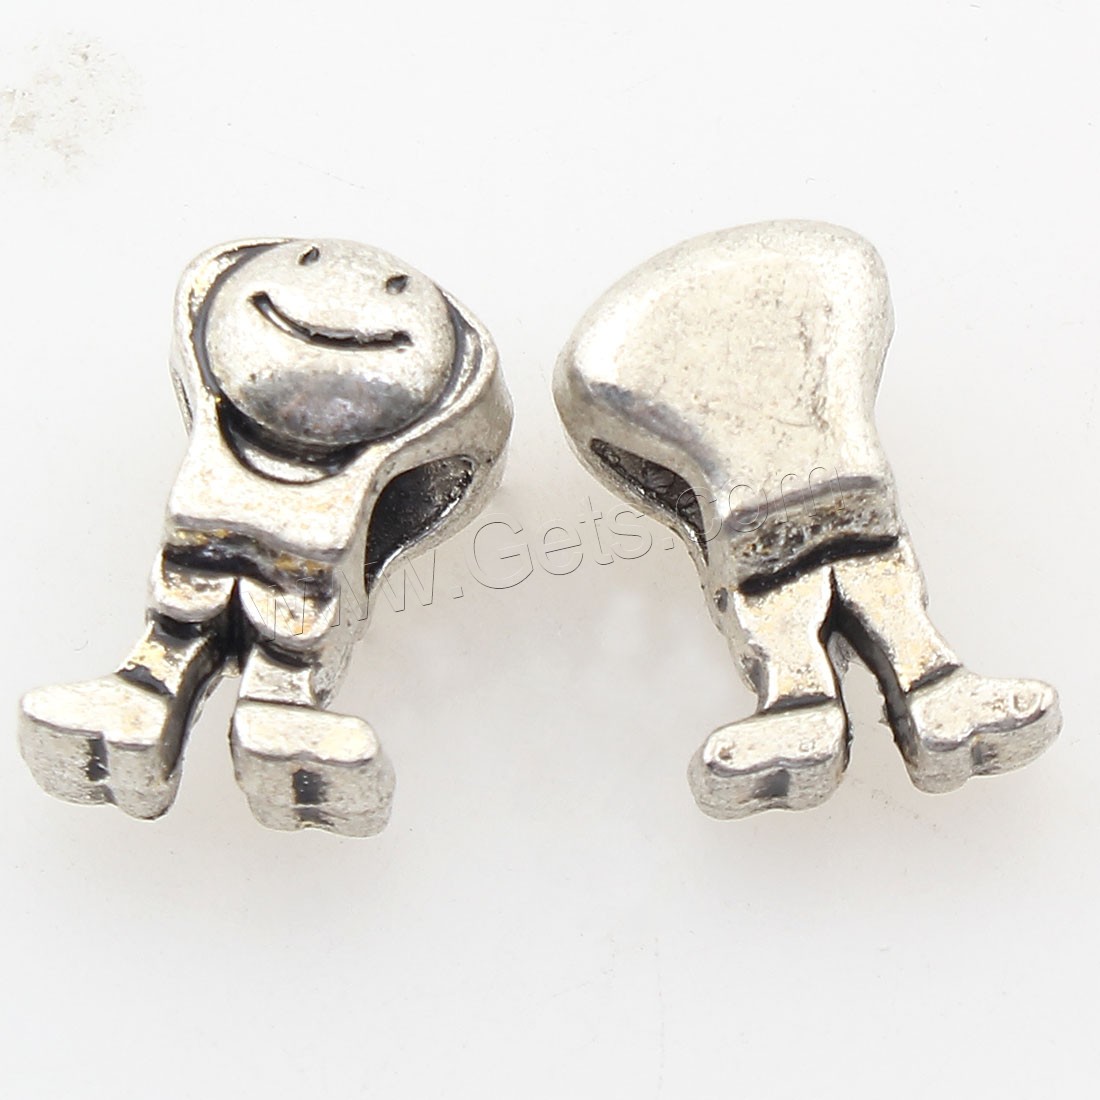 Zinc Alloy Jewelry Beads, antique silver color plated, 9x16mm, Hole:Approx 4mm, Approx 160PCs/Bag, Sold By Bag